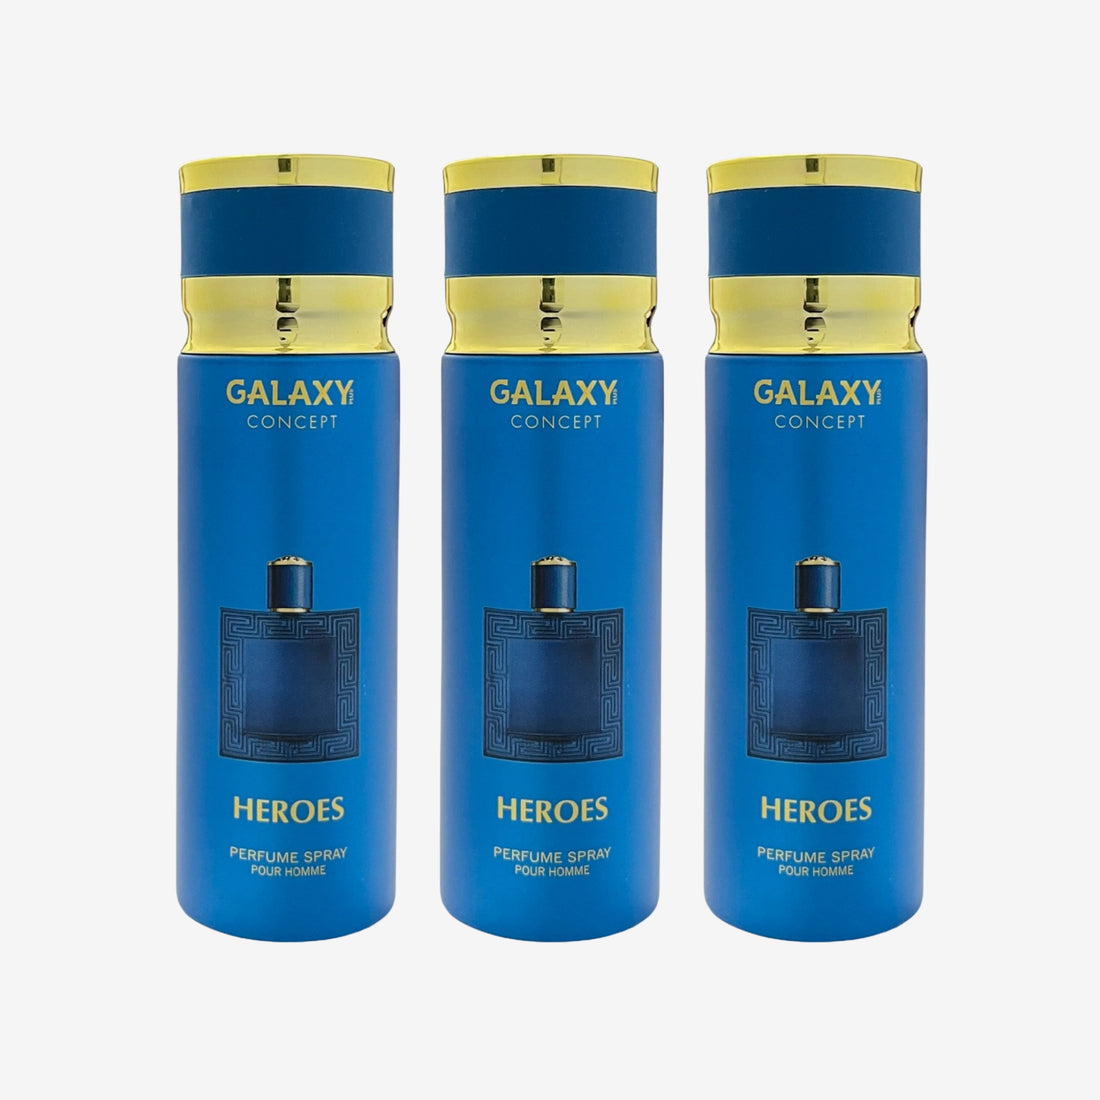 Galaxy Plus Concept HEROES Perfume Body Spray - Inspired By Eros